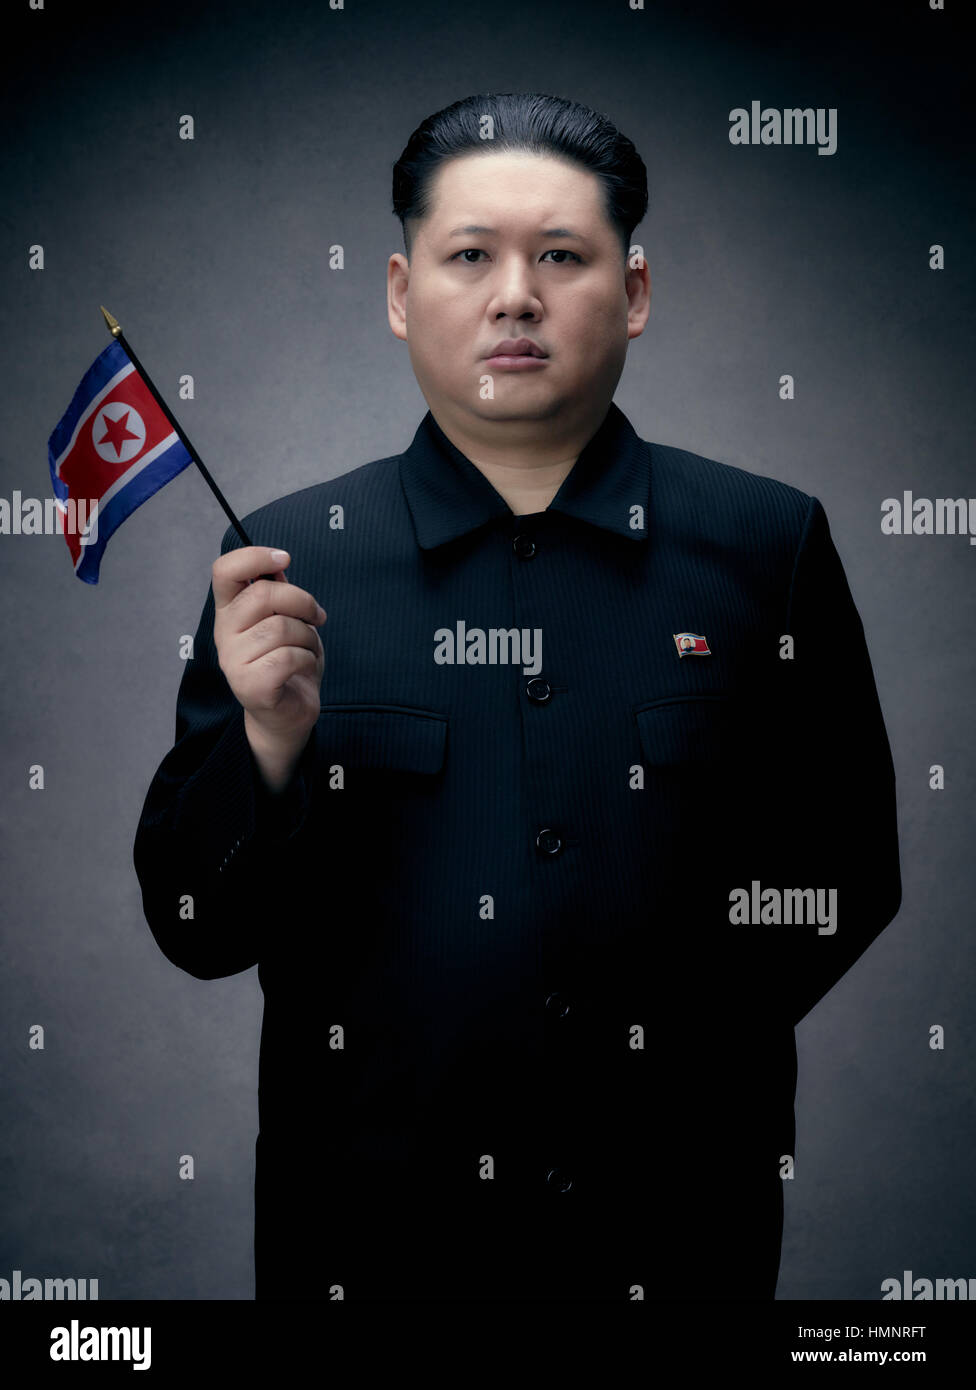 North Korea Leader Kim Jong-Un lookalike during his visit to Hong Kong. He is the premier and most well known Kim Jong-Un lookalike in the world. Stock Photo